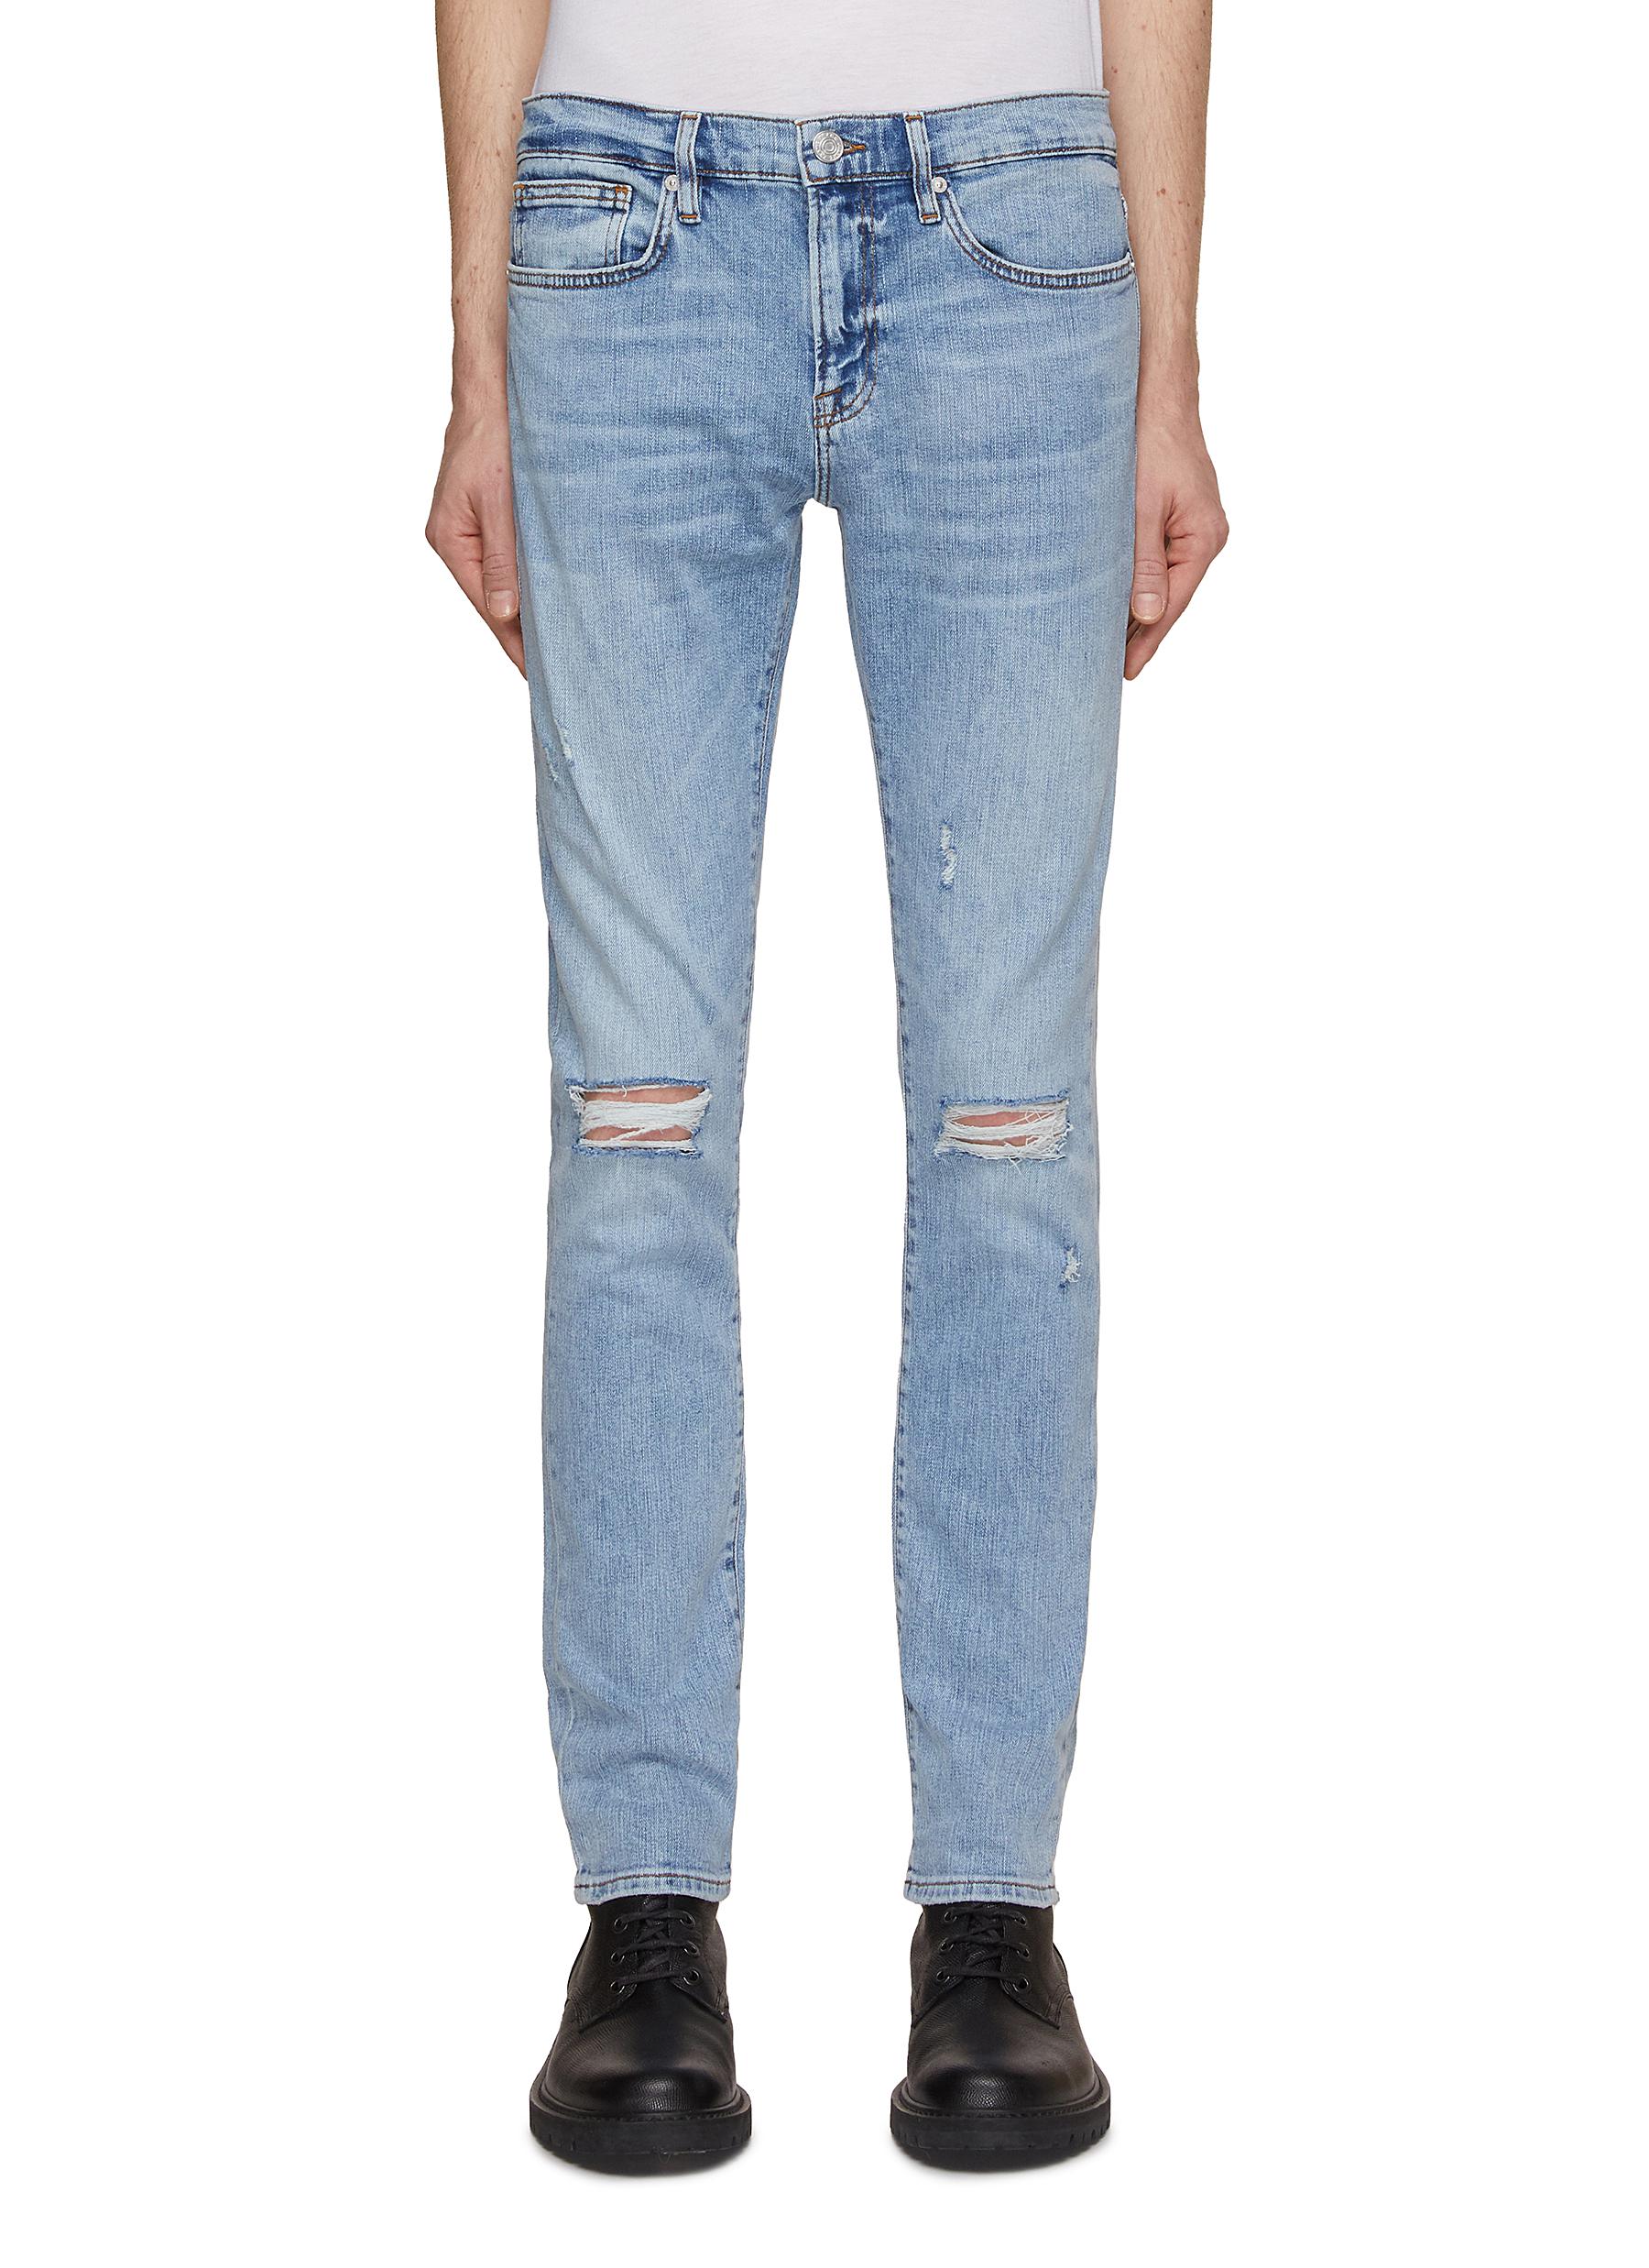 L'Homme Ripped Knee Skinny Jeans